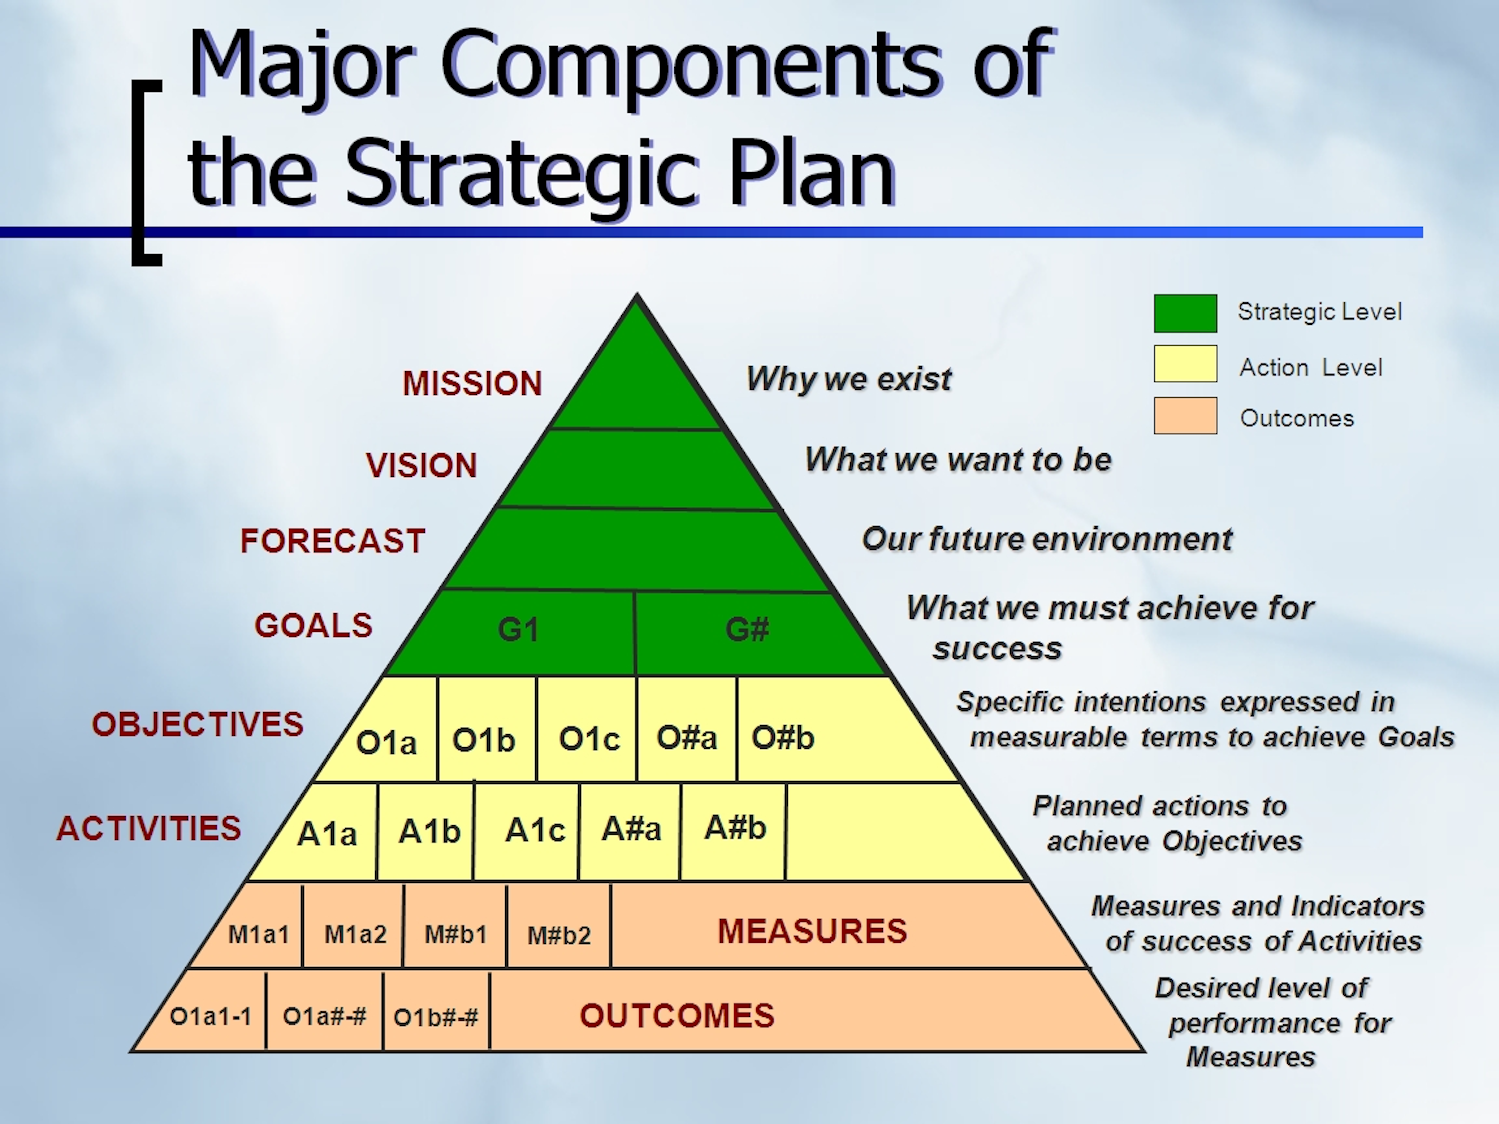 define strategic planning and give example